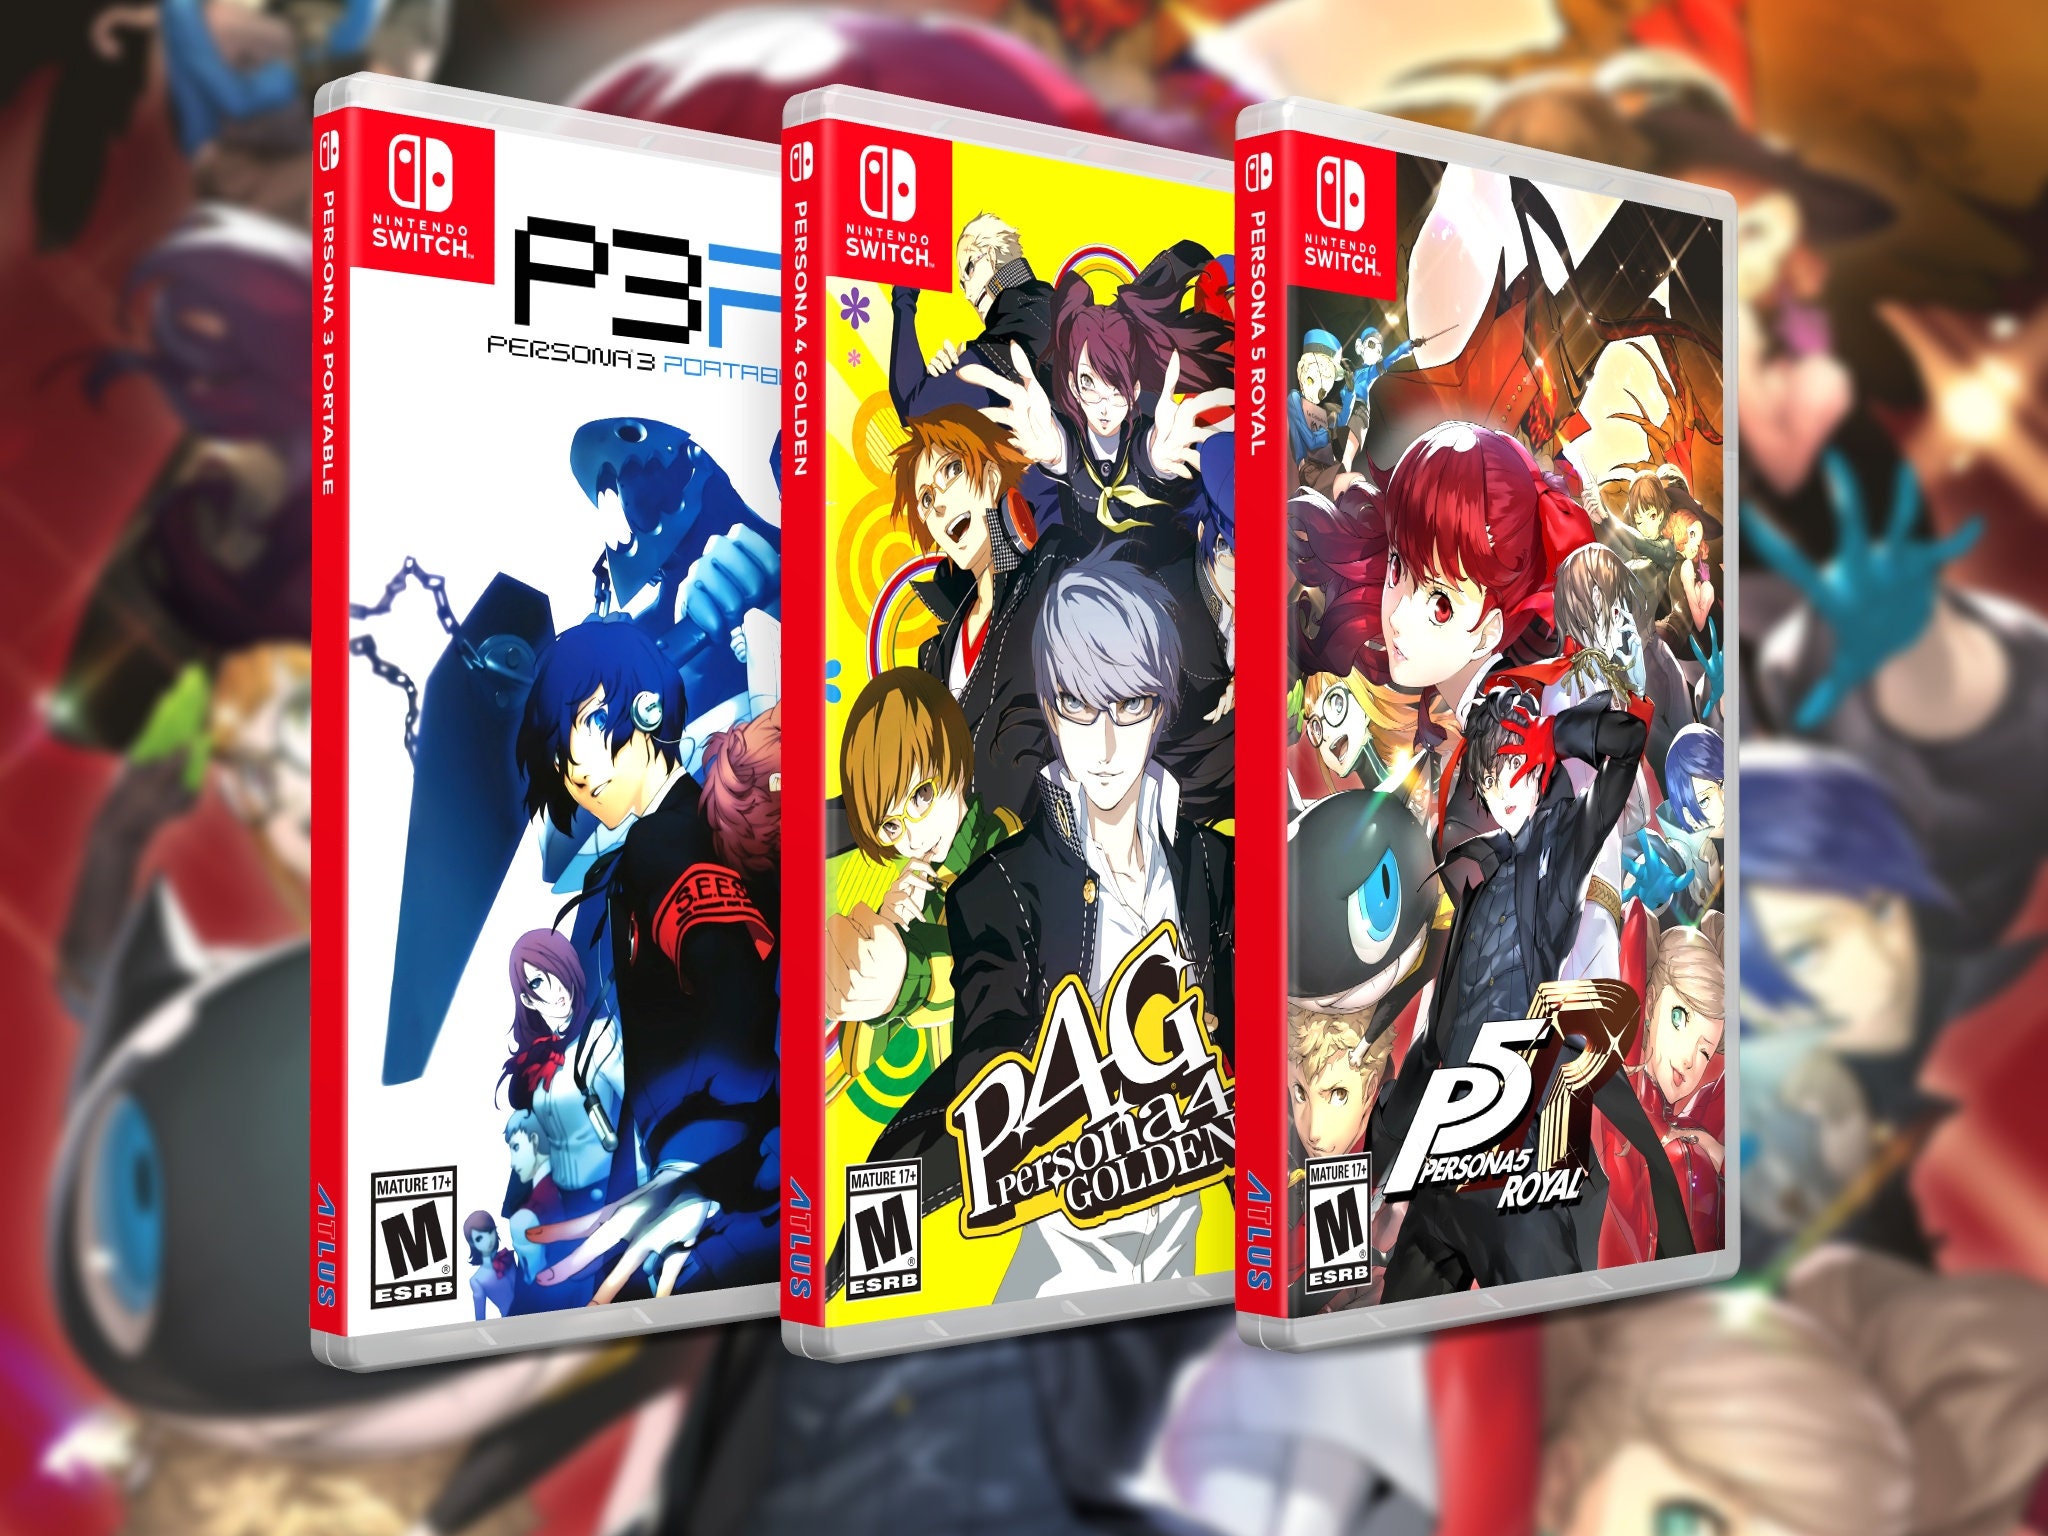 Play three iconic Persona games on Nintendo Switch: Persona 3 Portable,  Persona 4 Golden, and Persona 5 Royal! - News - Nintendo Official Site